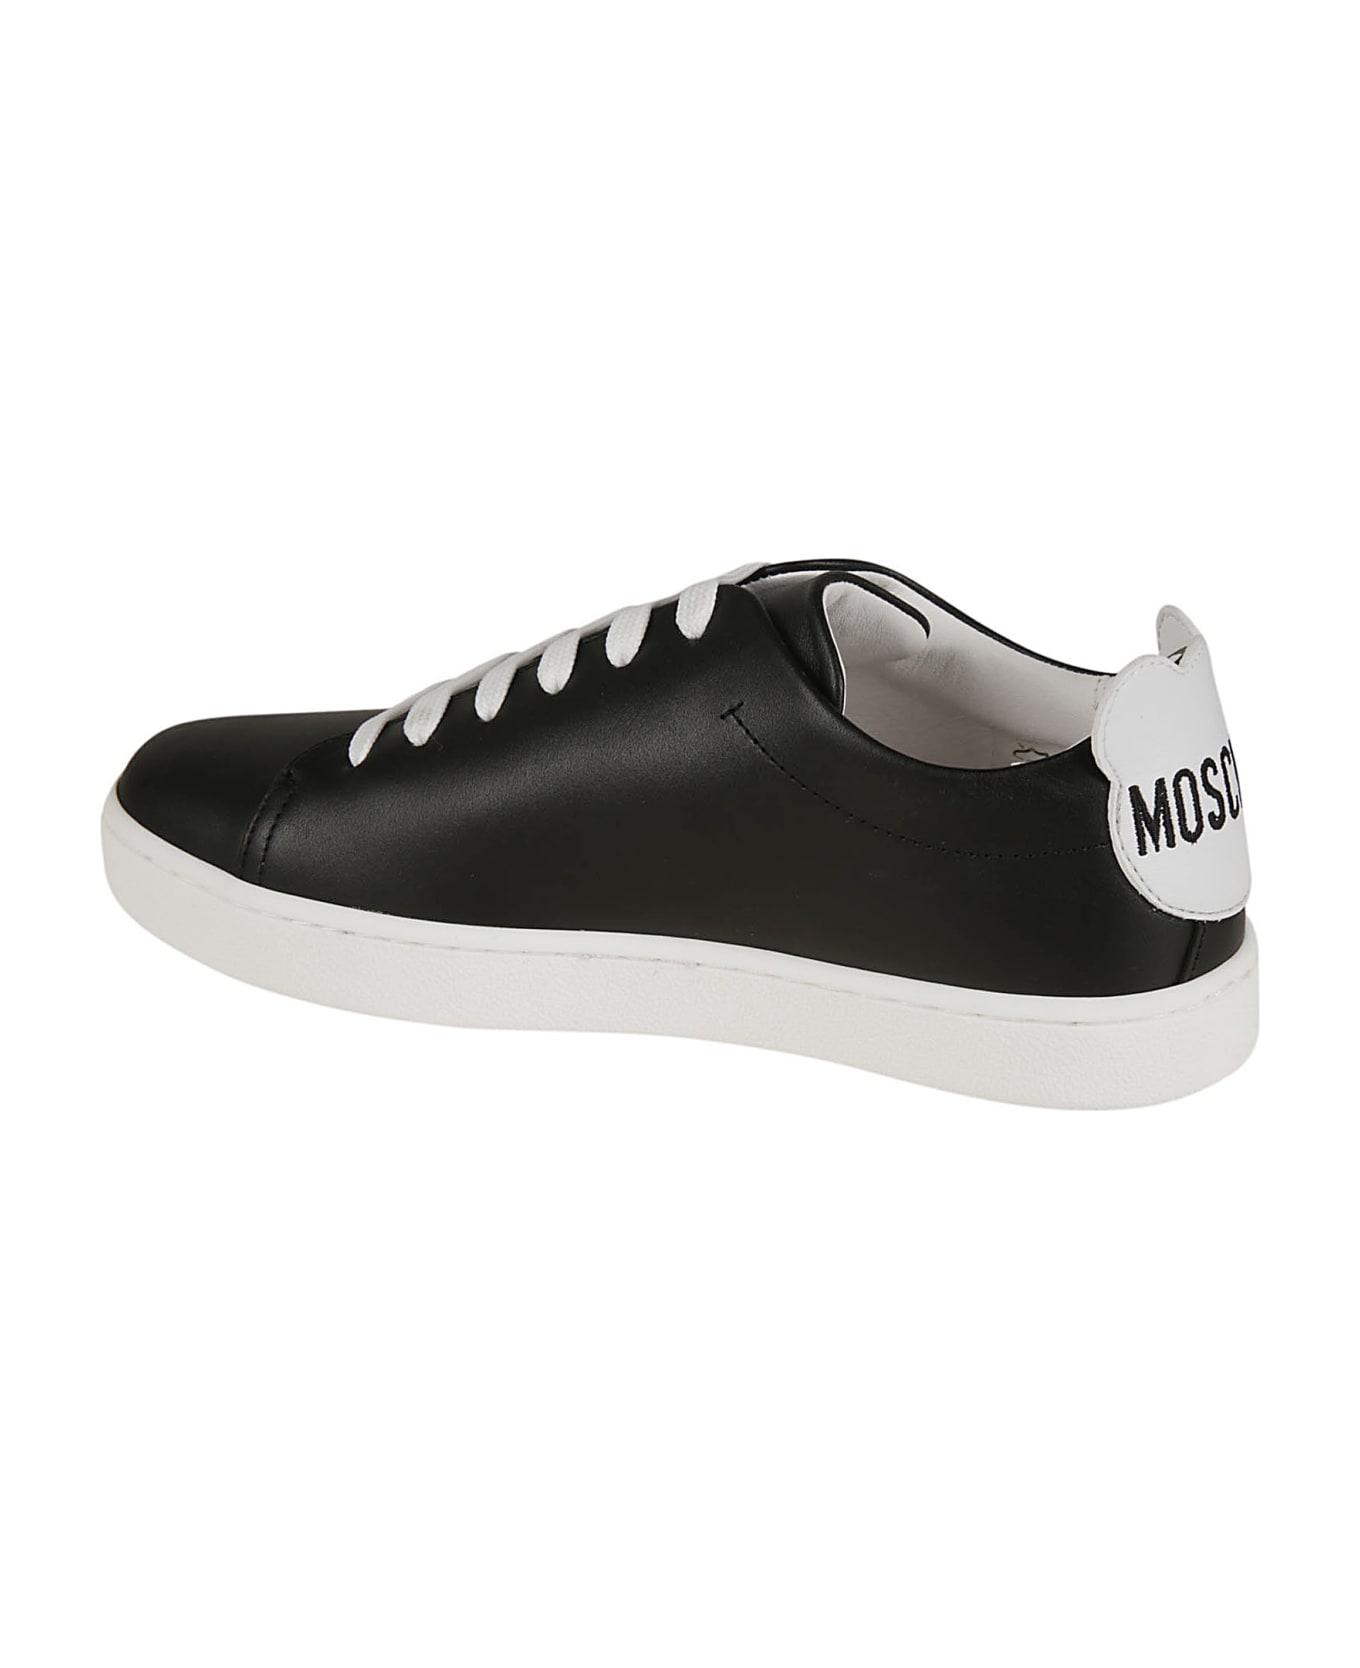 Moschino Embossed Logo Sole Sneakers - Black